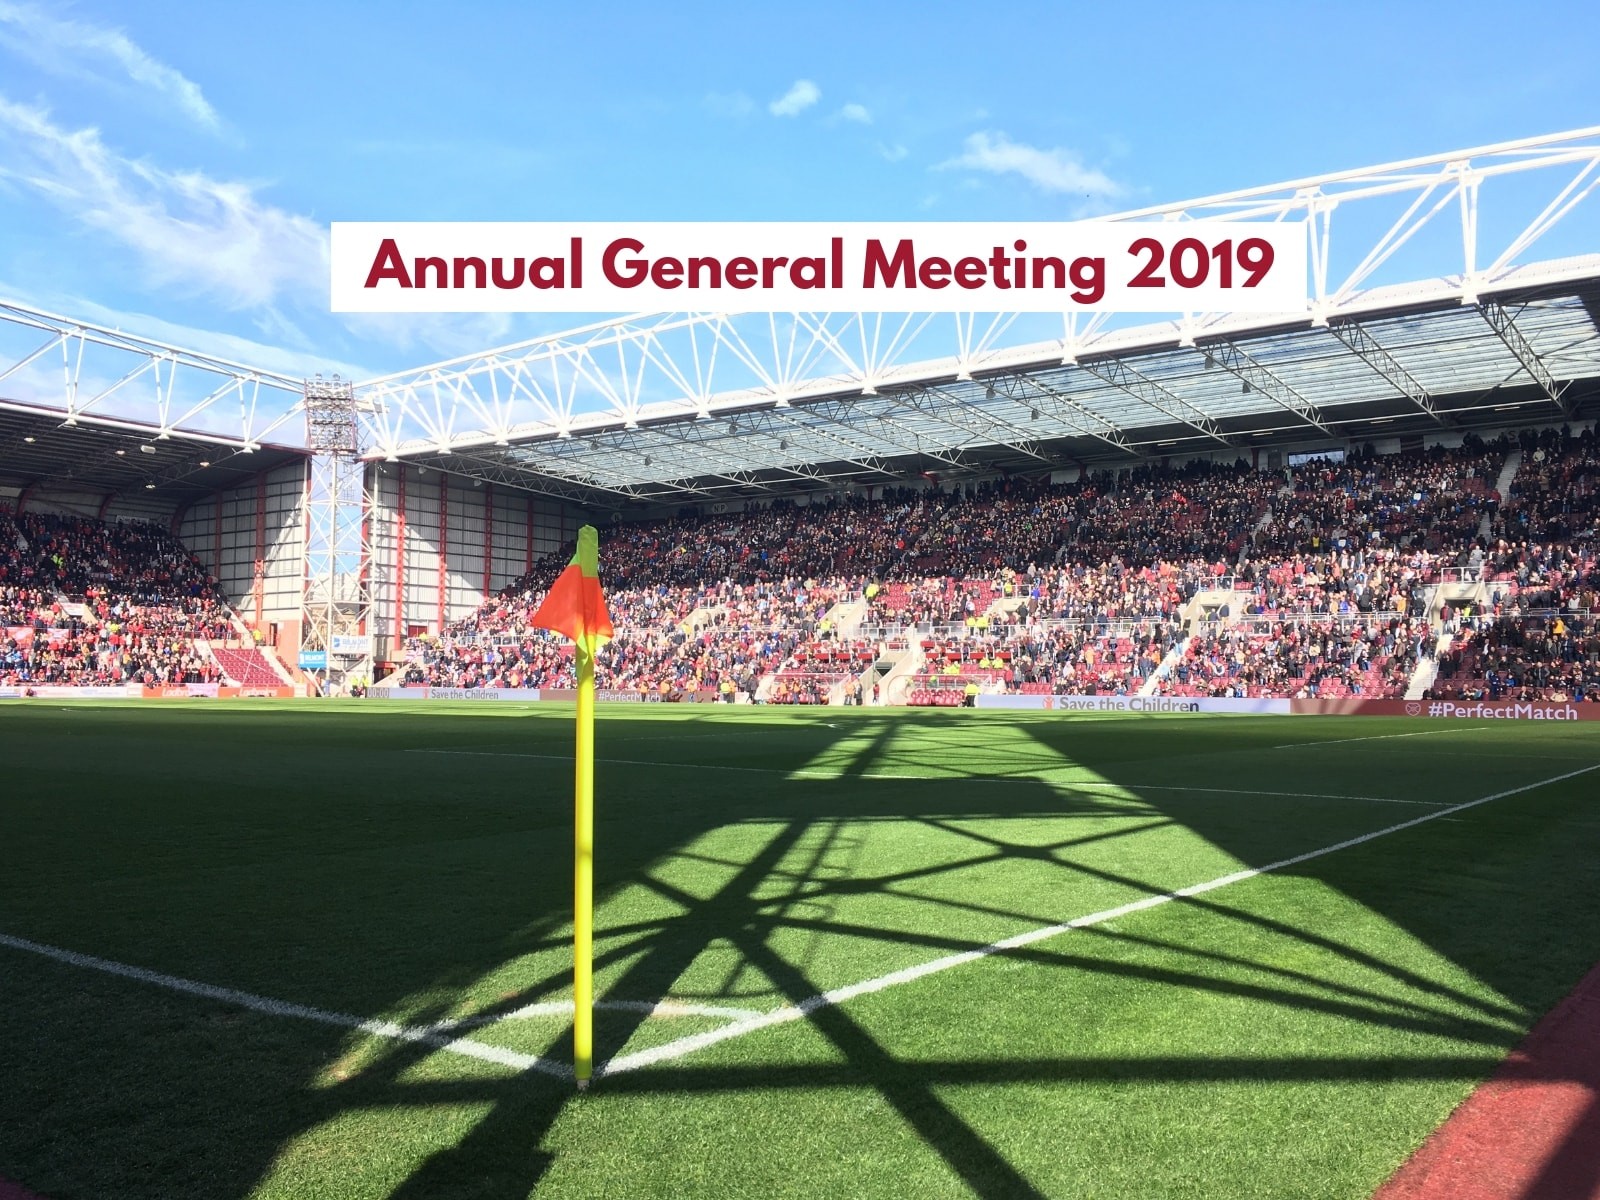  » Save the date: Our 2019 Annual General Meeting on 8 October